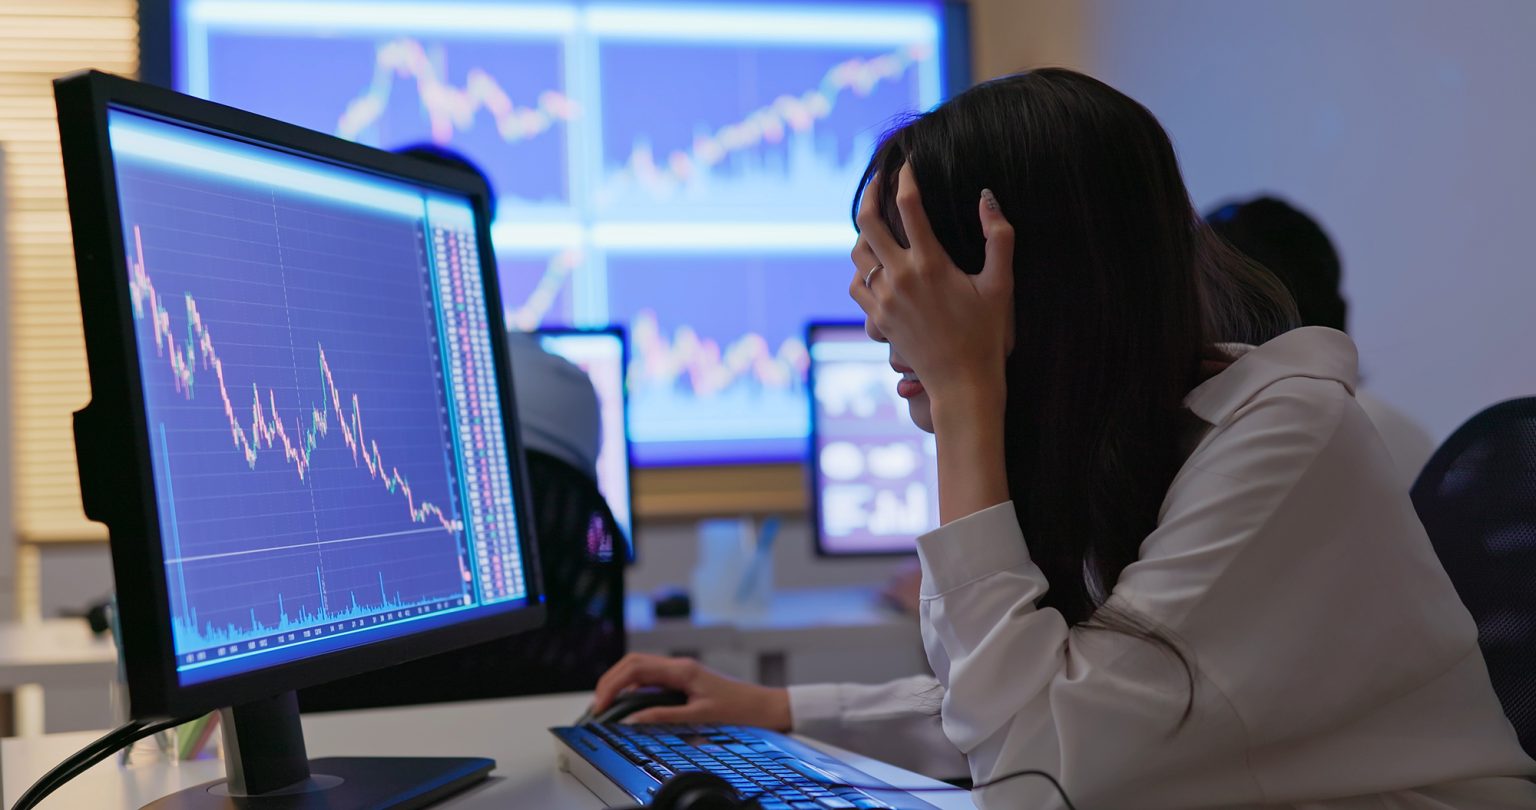 Stock market analyst in front of screen with a down market